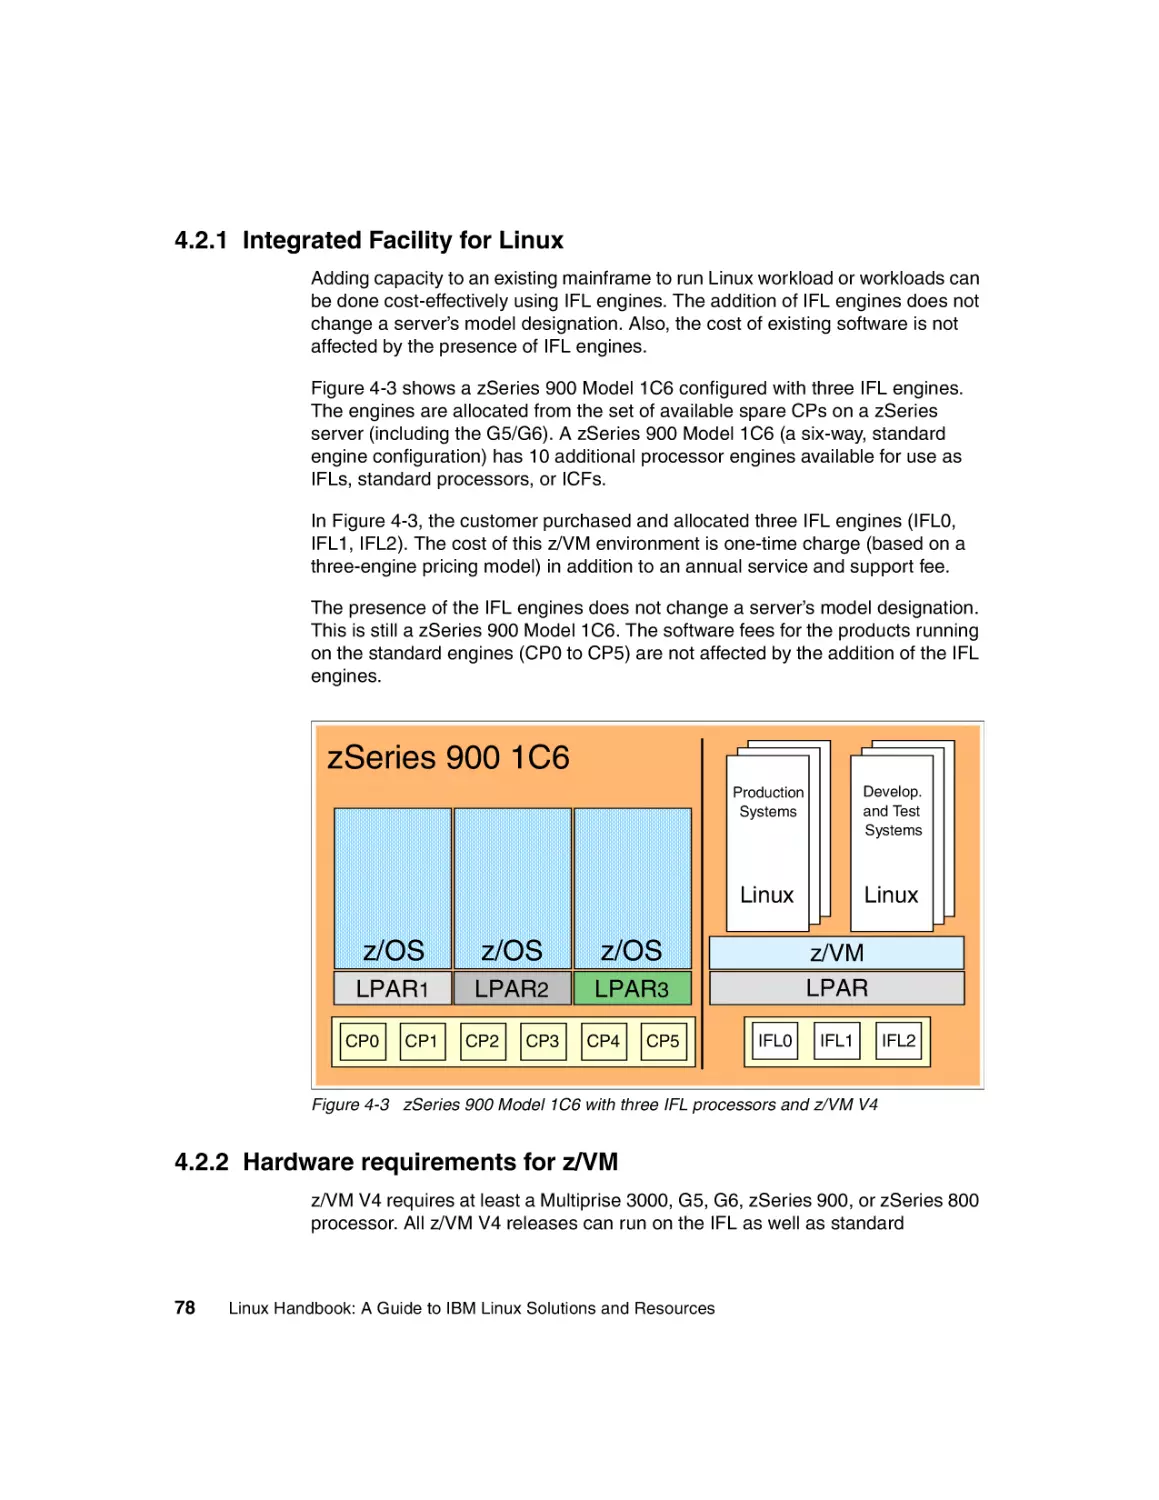 4.2.1 Integrated Facility for Linux
4.2.2 Hardware requirements for z/VM